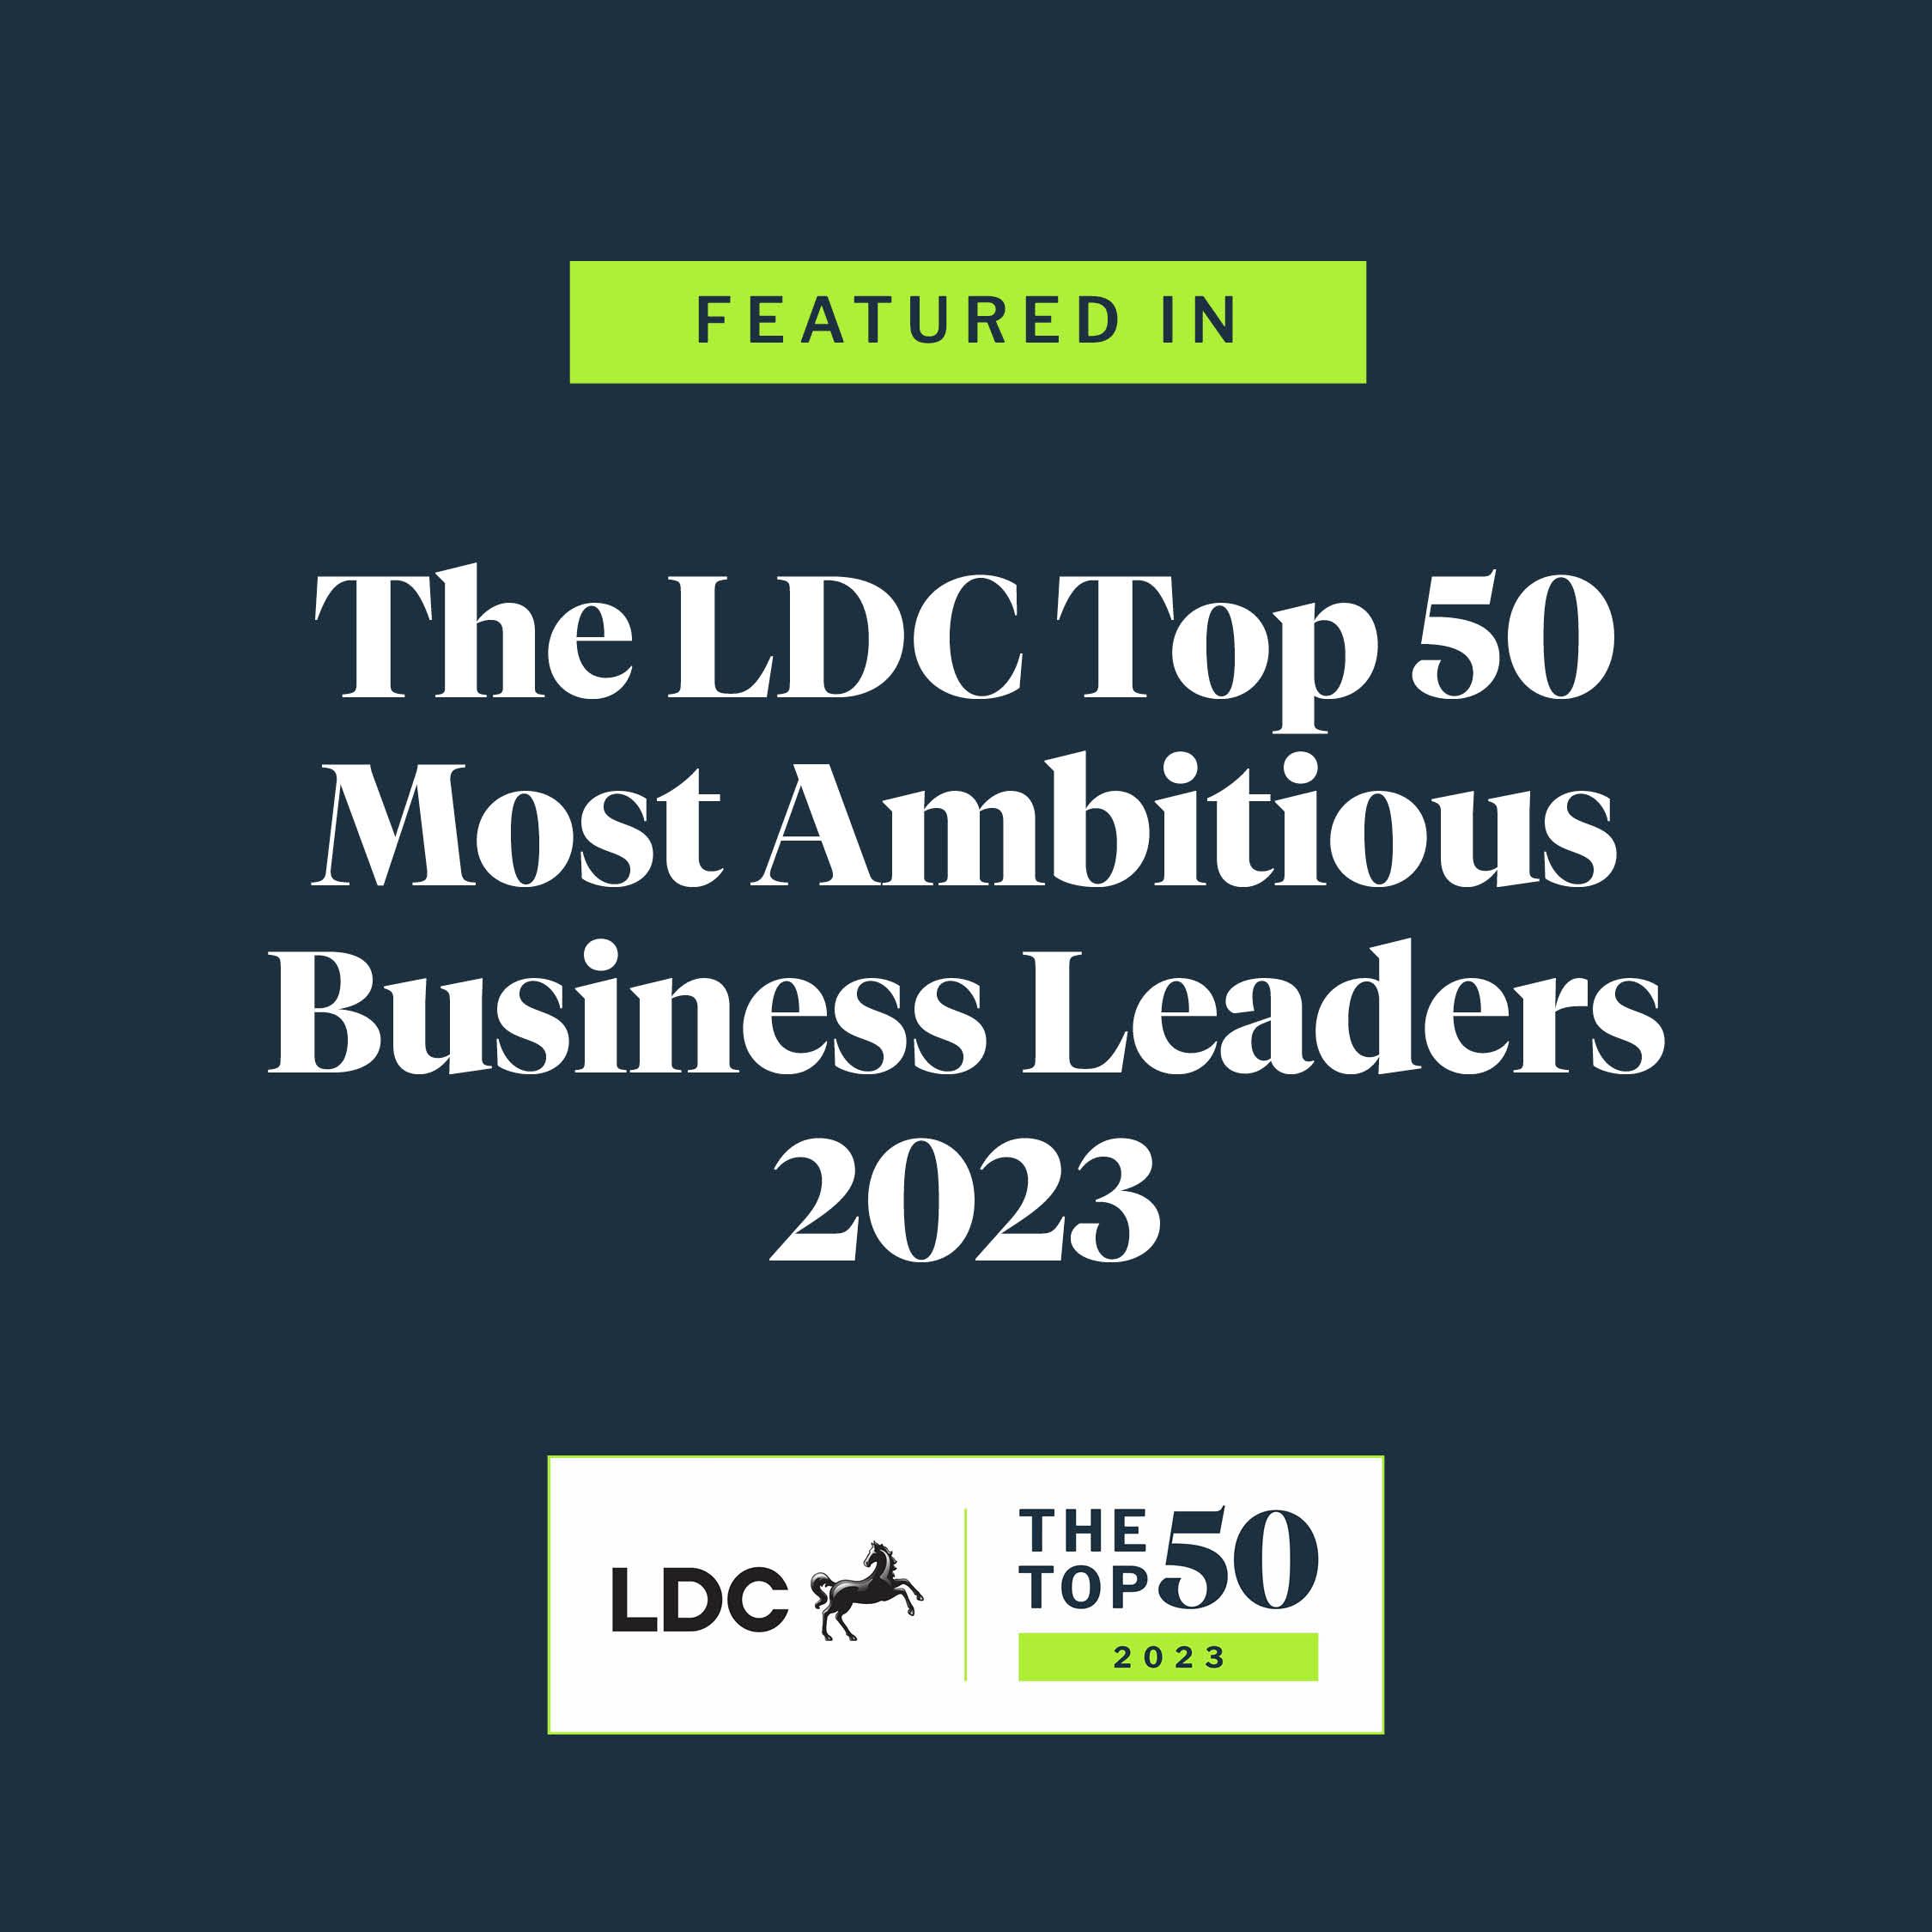 Rob Carlin recognised among the UK’s Top 50 Most Ambitious Business Leaders for 2023